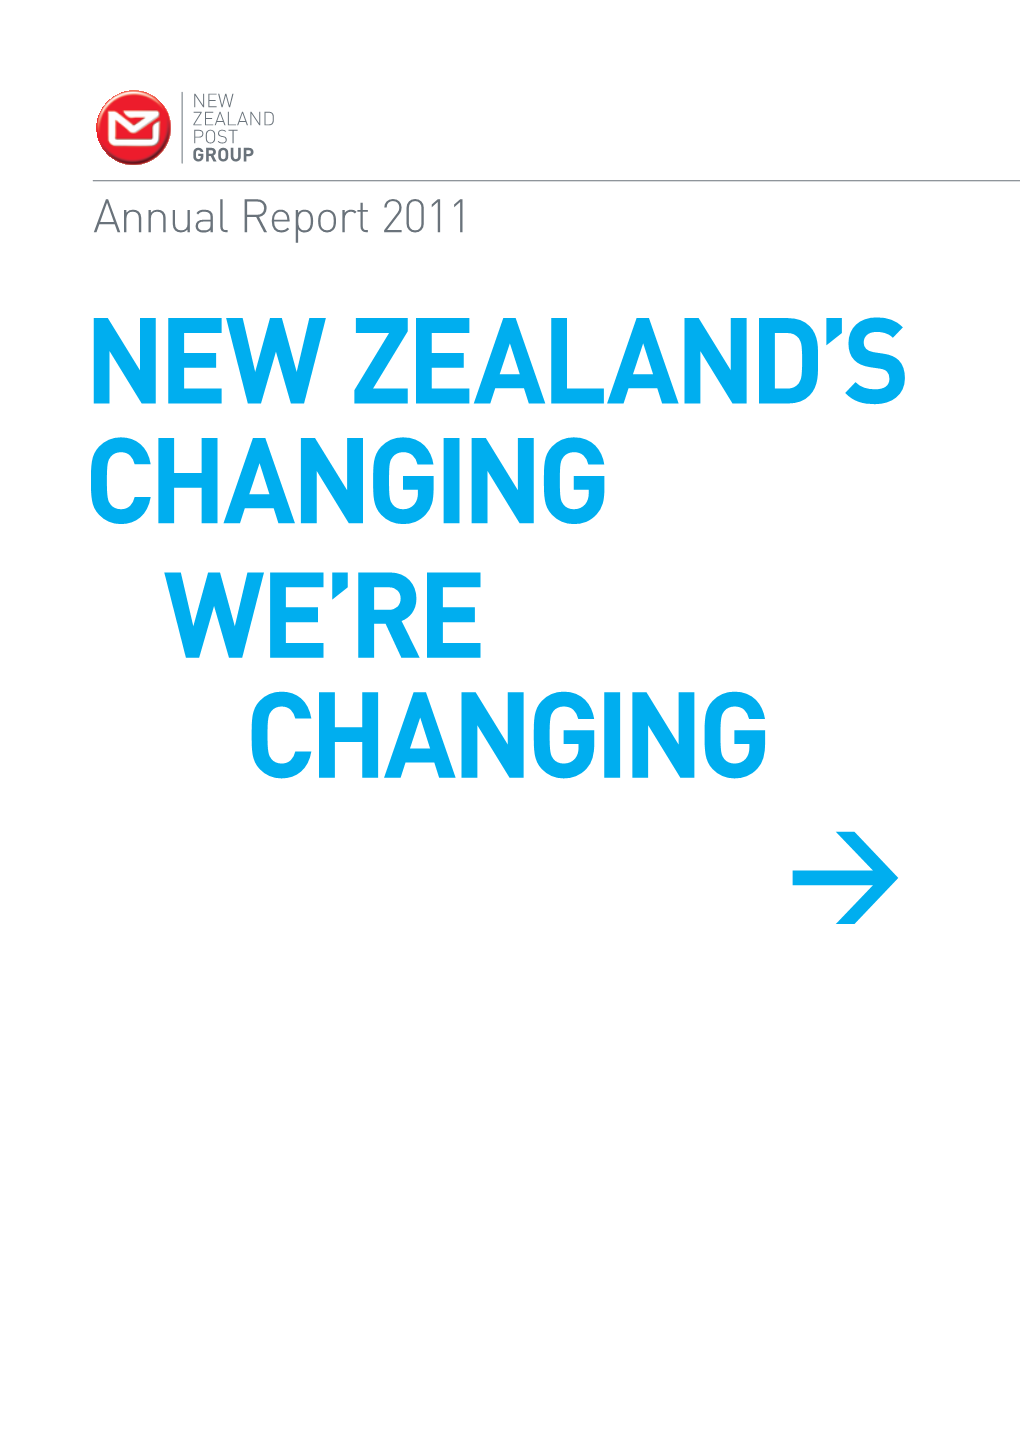 New Zealand POST GROUP Annual Report 2011